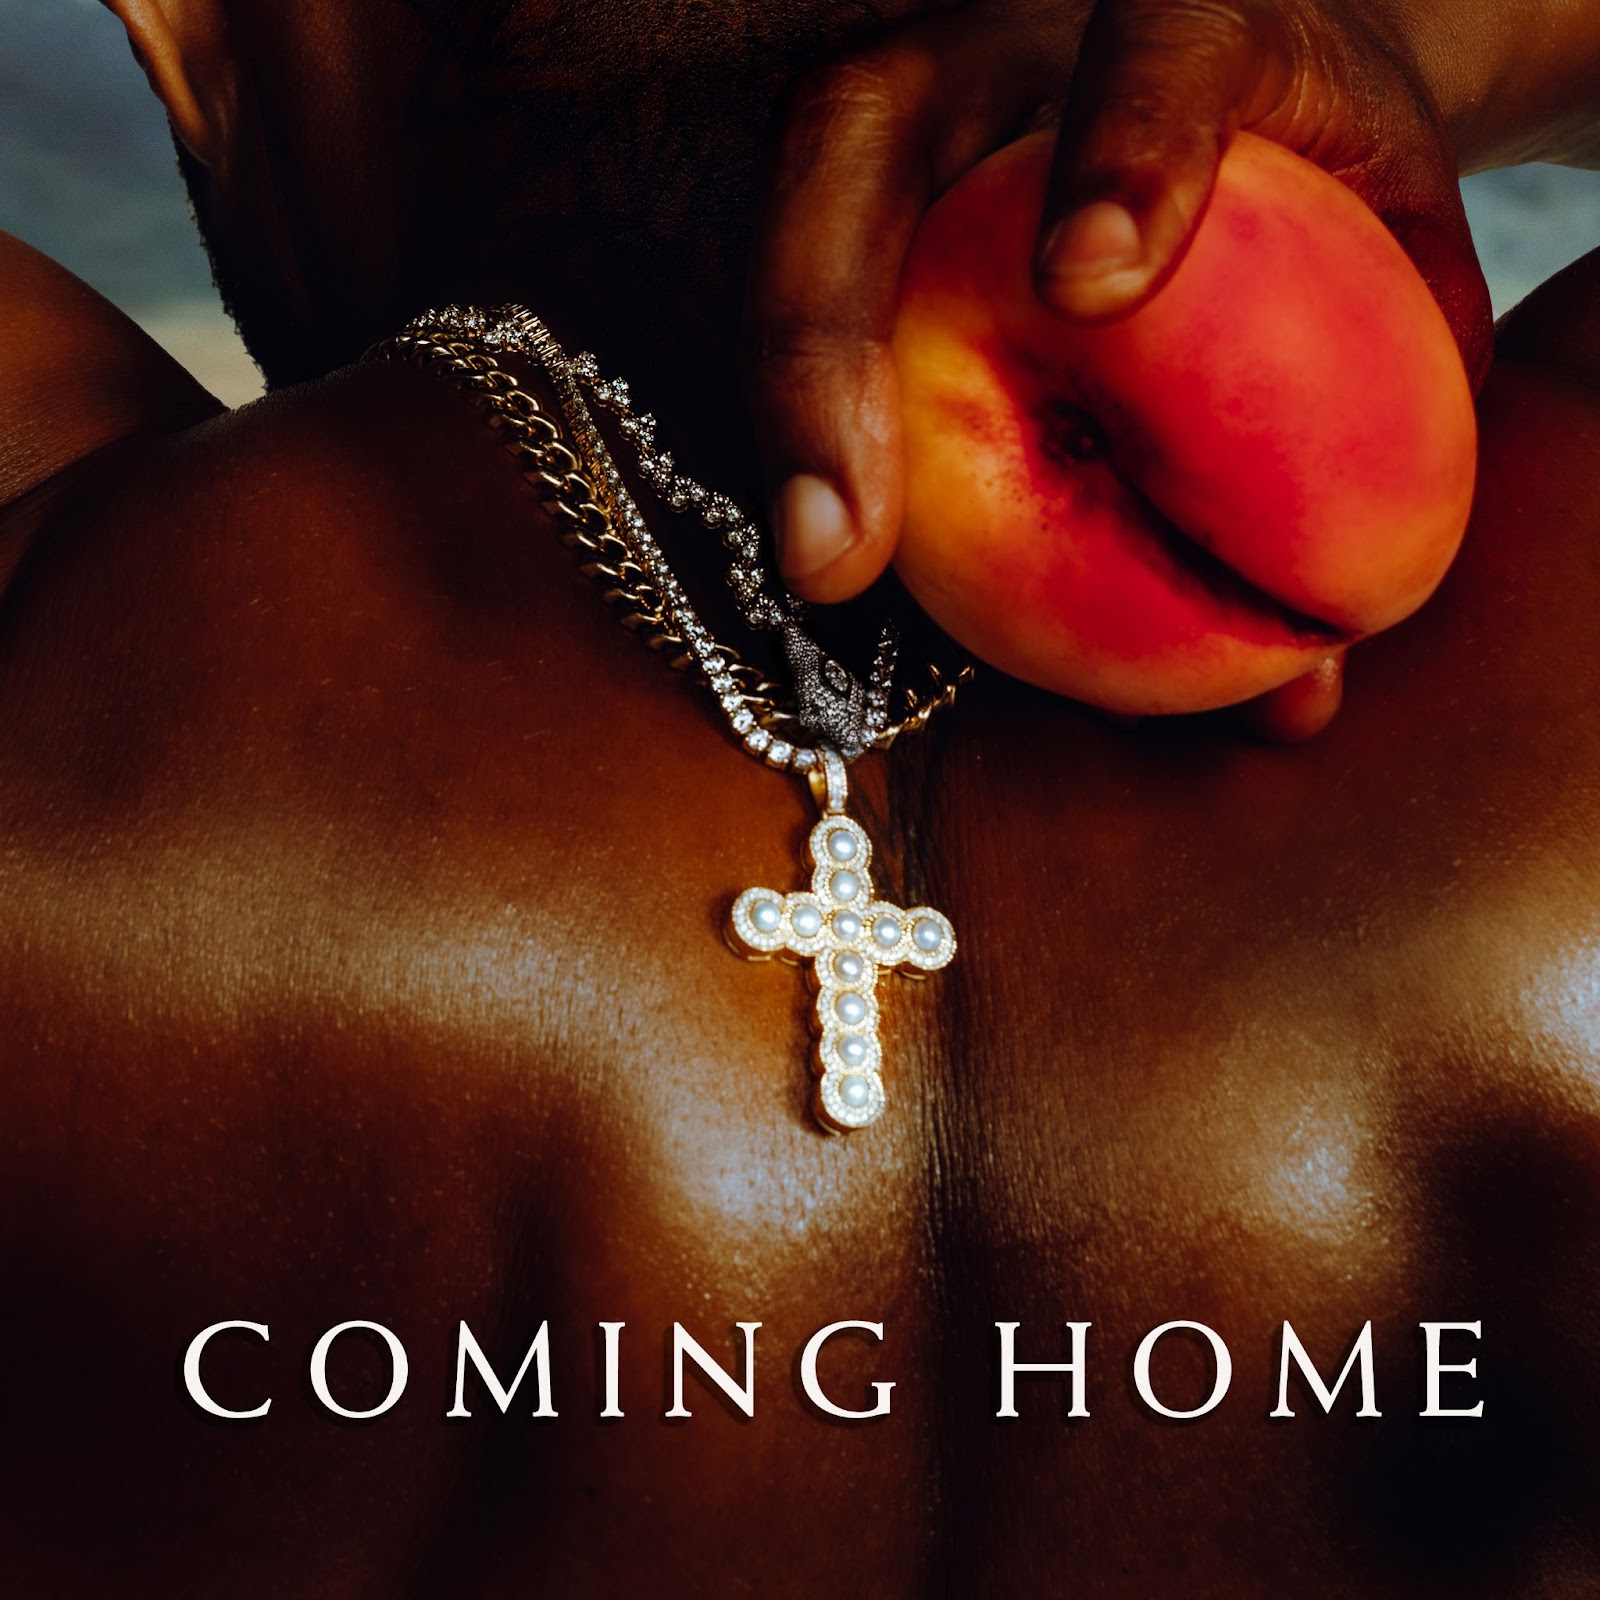 Usher Announces Release of Ninth Album 'COMING HOME'